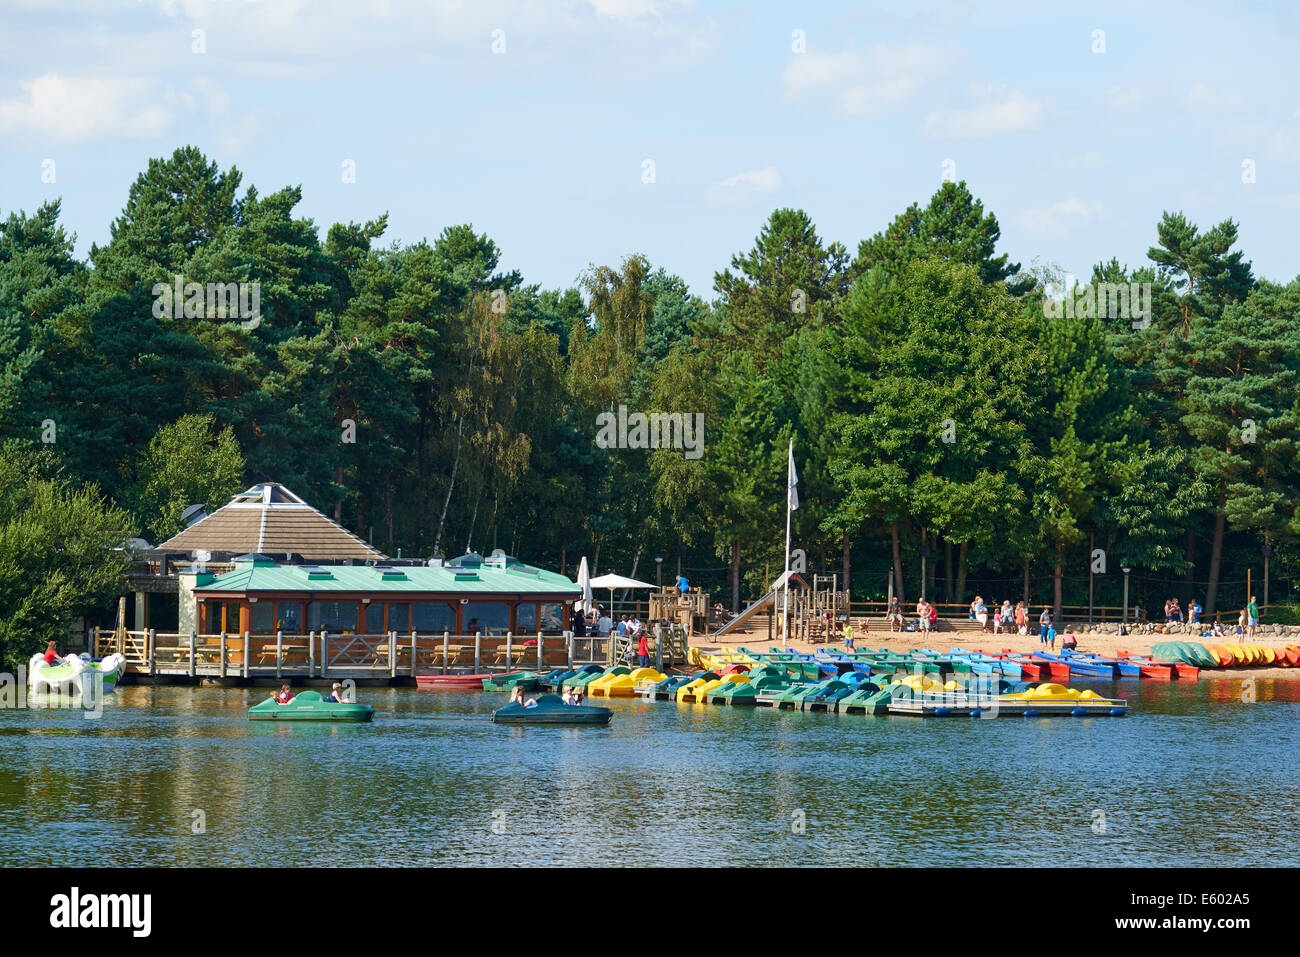 View Across Water Sports Lake Towards The Boathouse, Beach And Pancake House Center Parcs Sherwood Forest Nottinghamshire UK Stock Photo